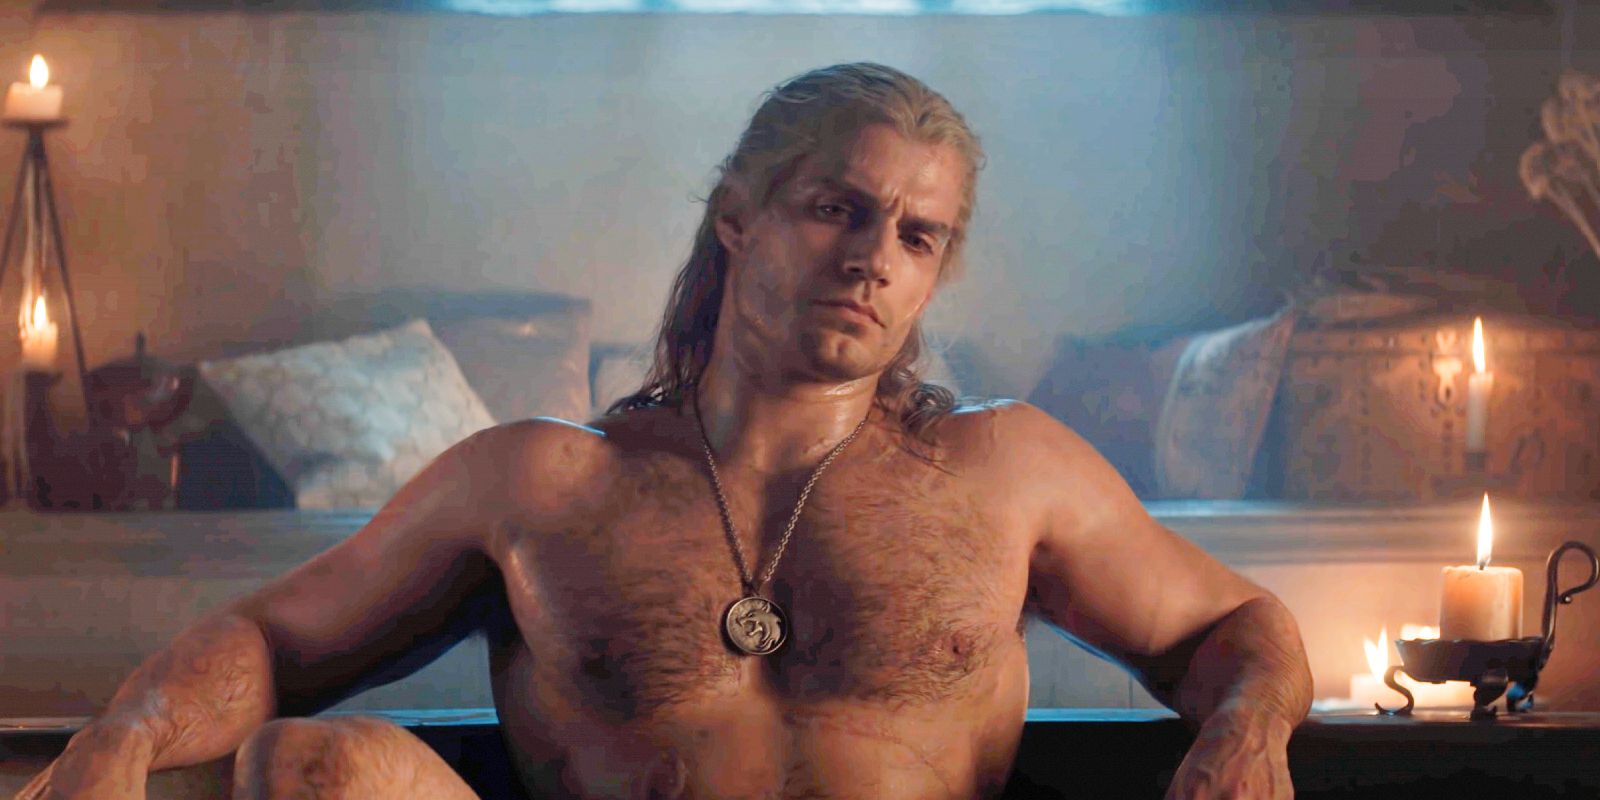 Henry Cavill as Geralt in a bath in The Witcher